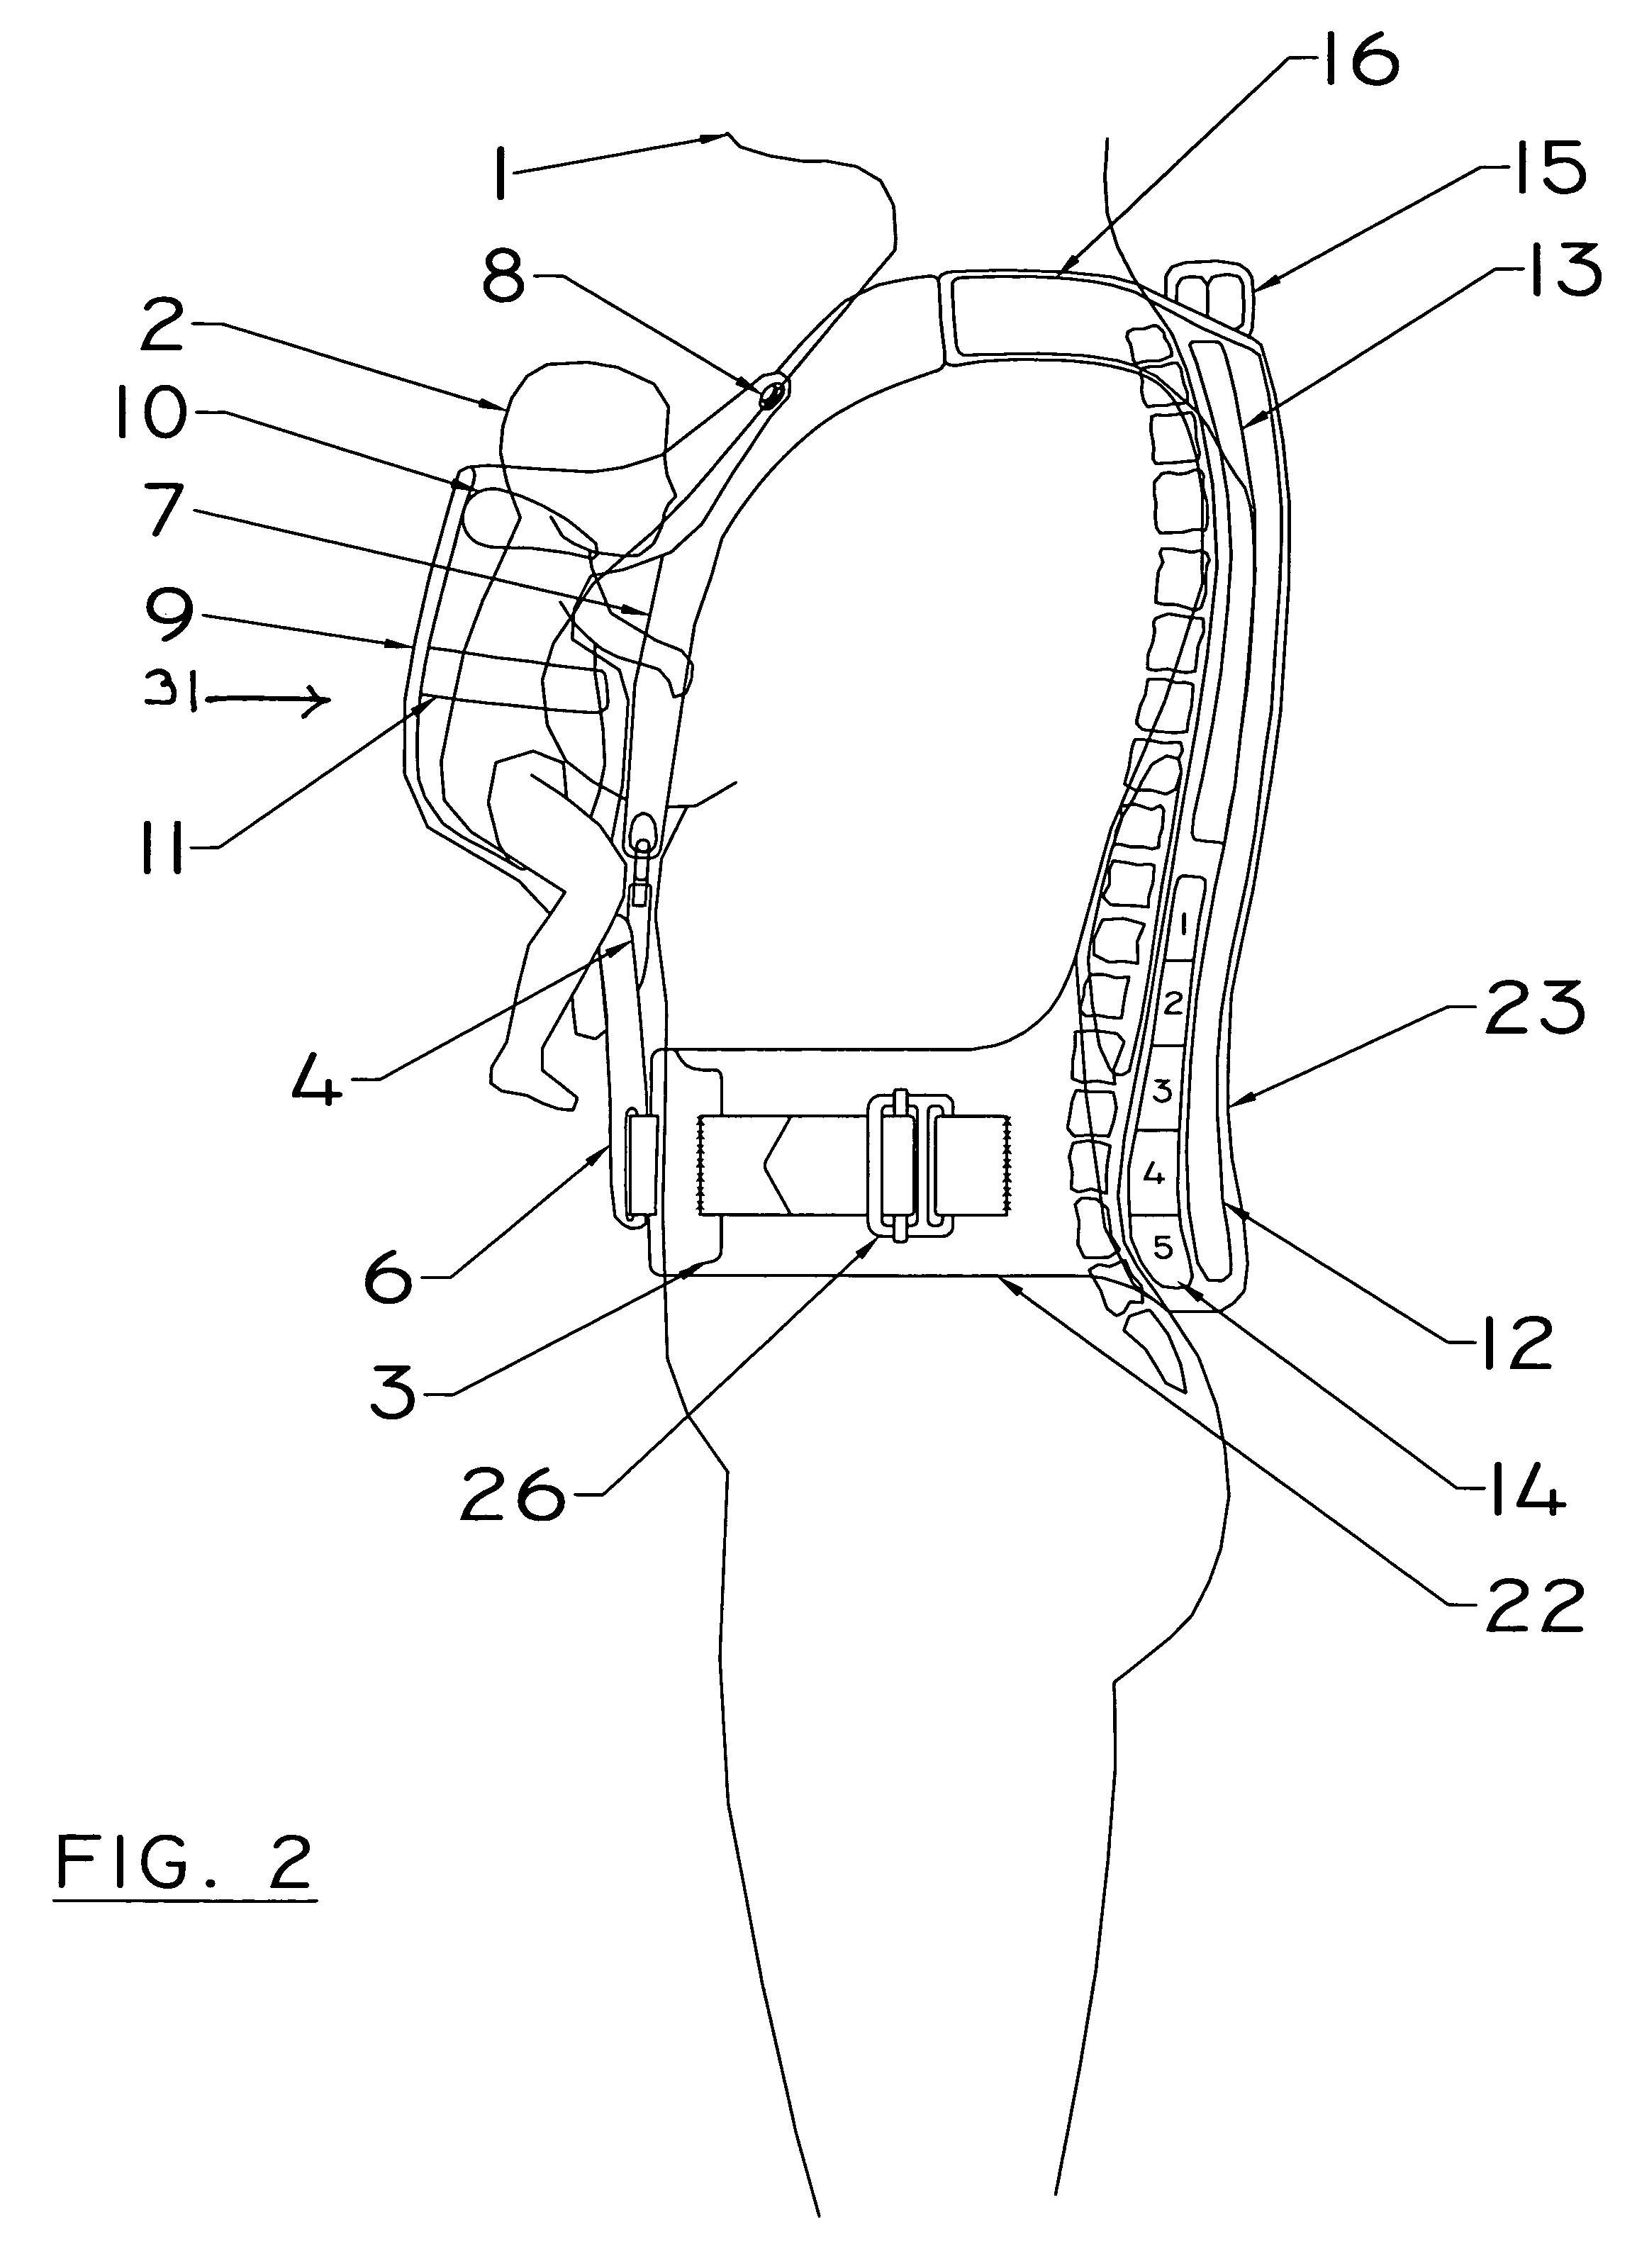 Devices for alleviating back strain and back pain